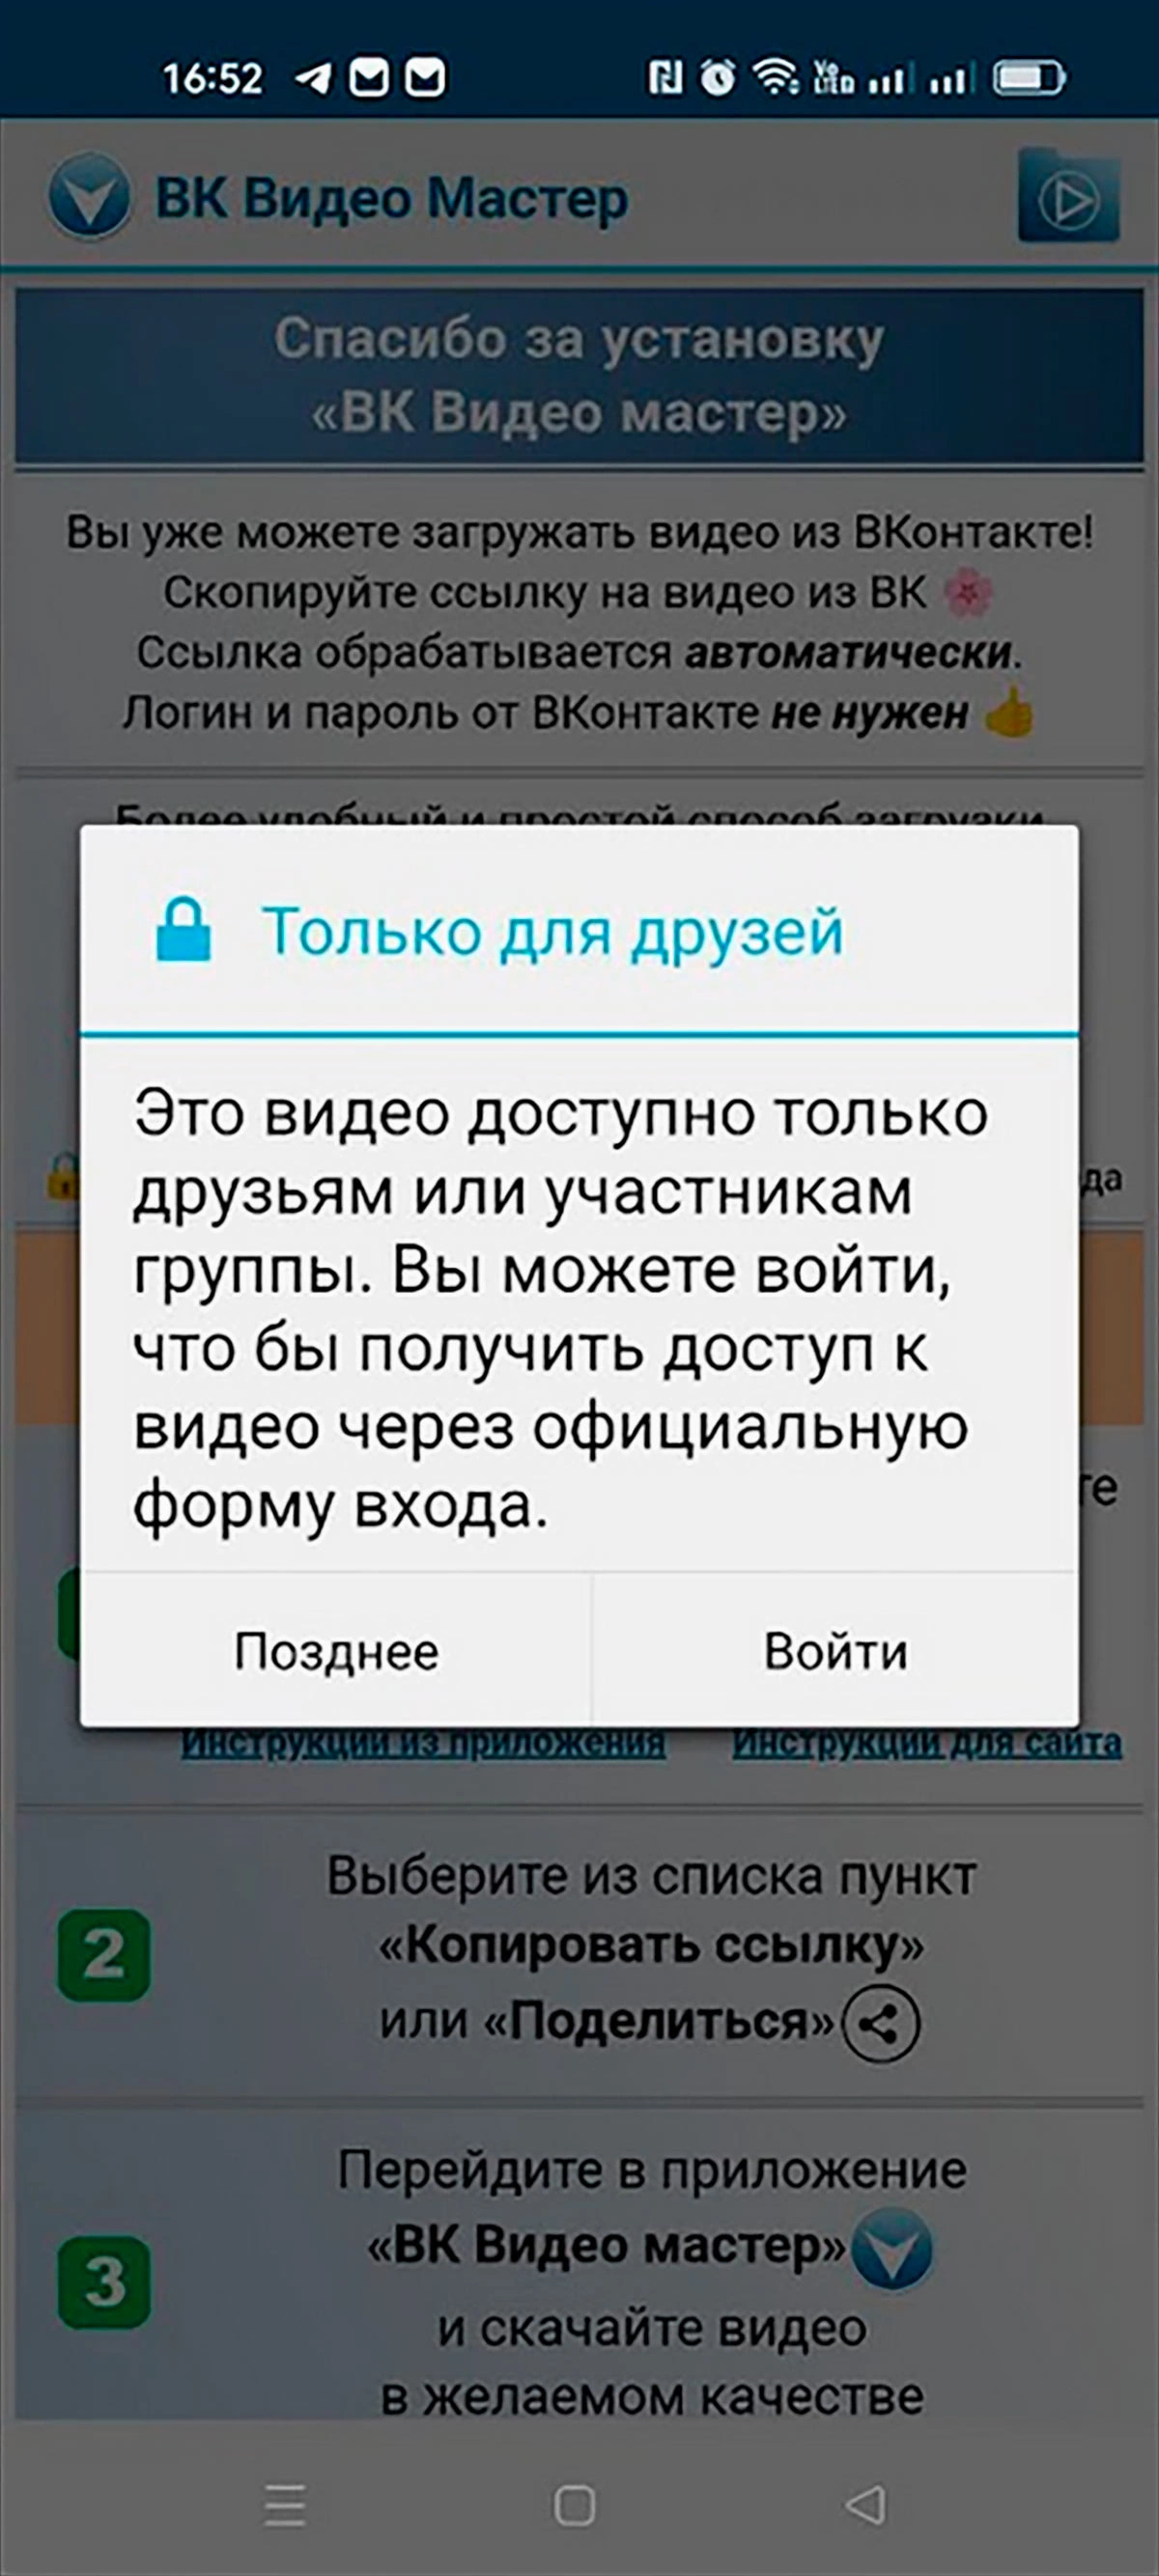 I have a problem with VK on my mobile device